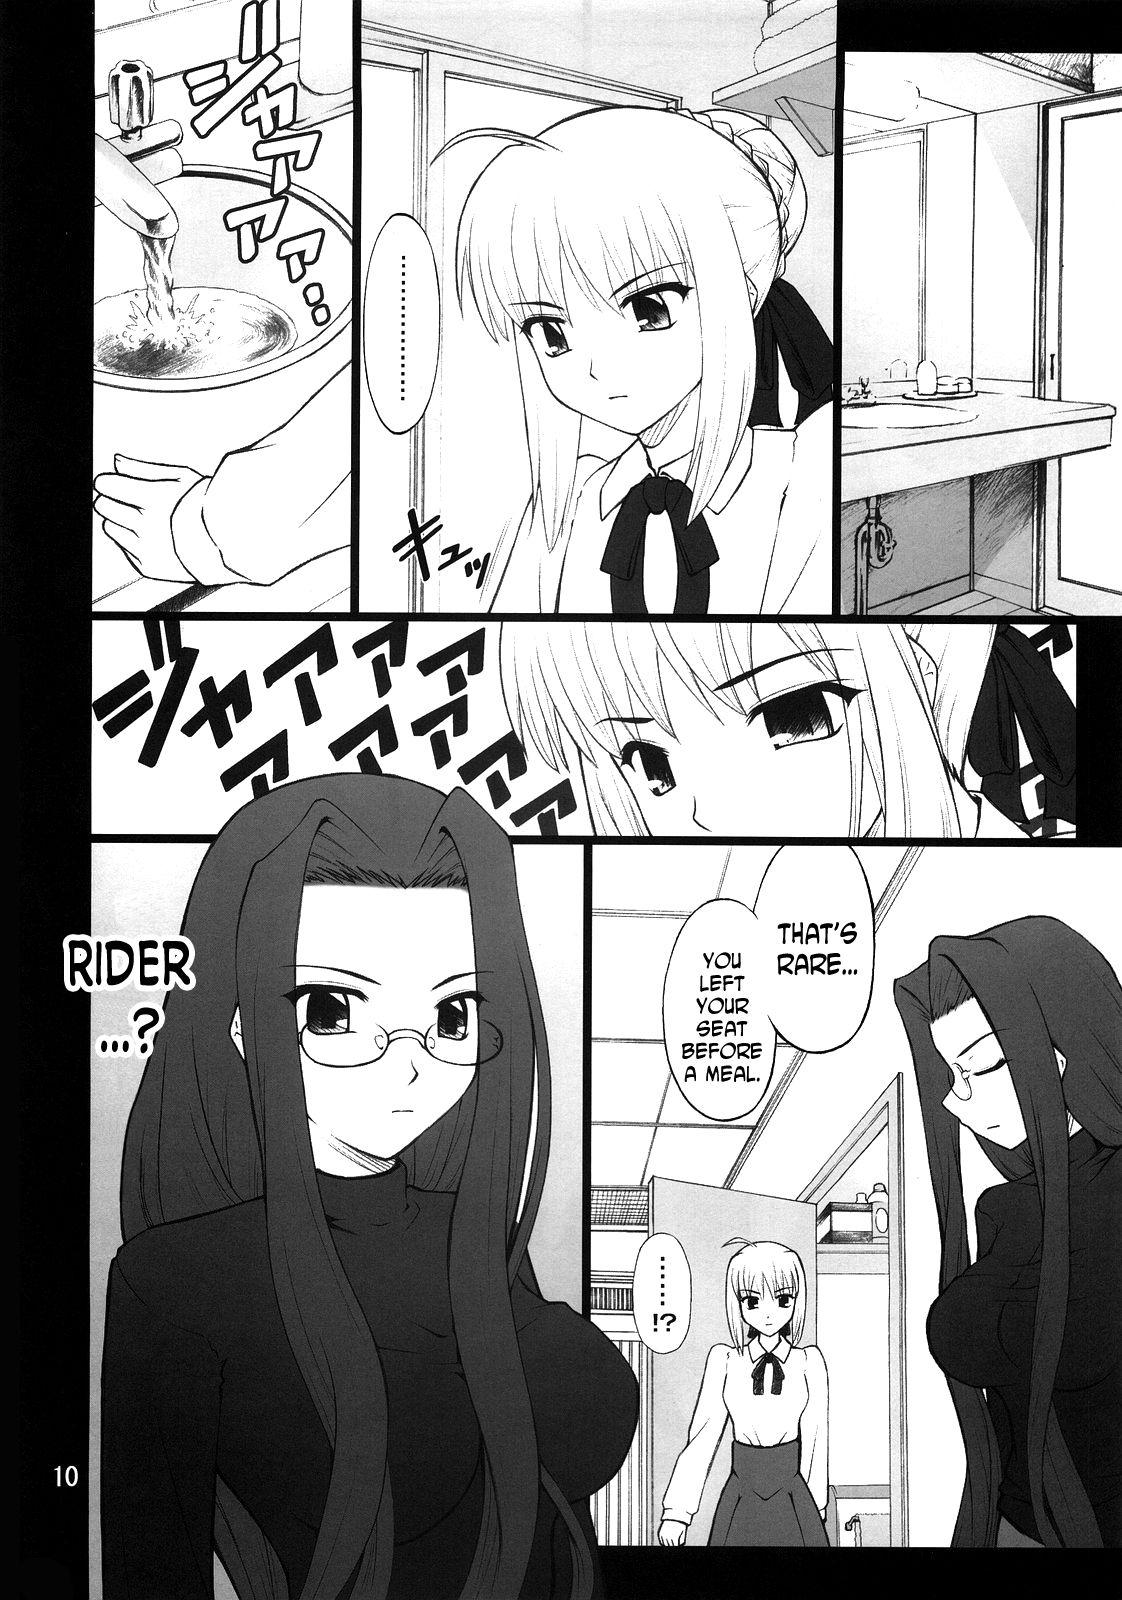 Strap On Grem-Rin 2 - Fate stay night Smalltits - Page 9